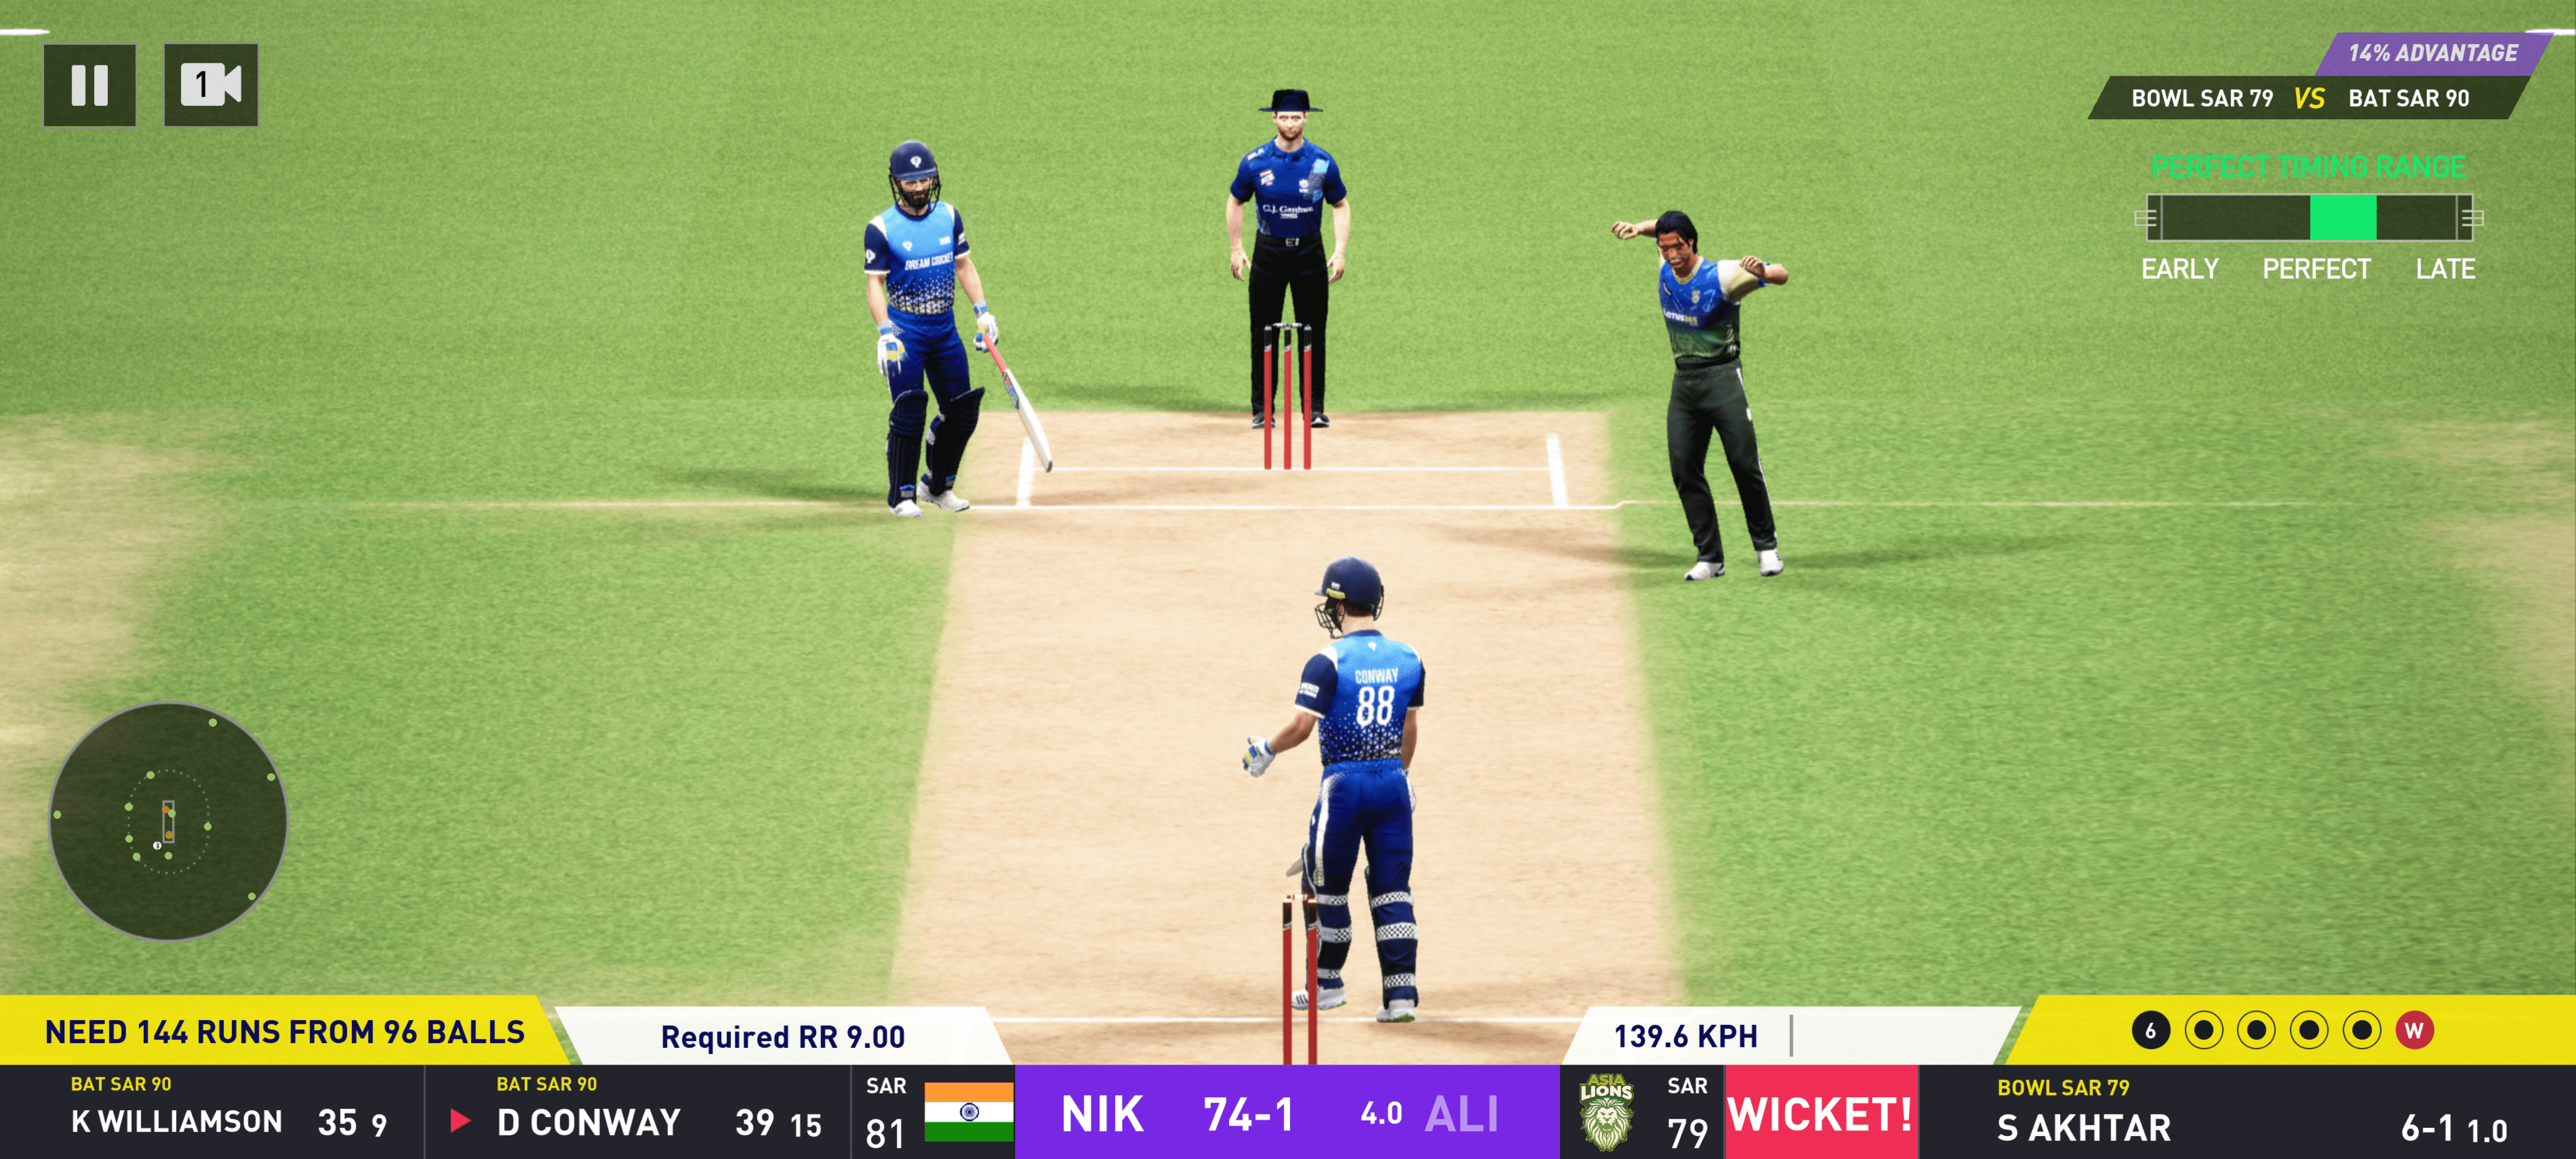 Dream11 launches mobile game Dream Cricket 24 in beta testing